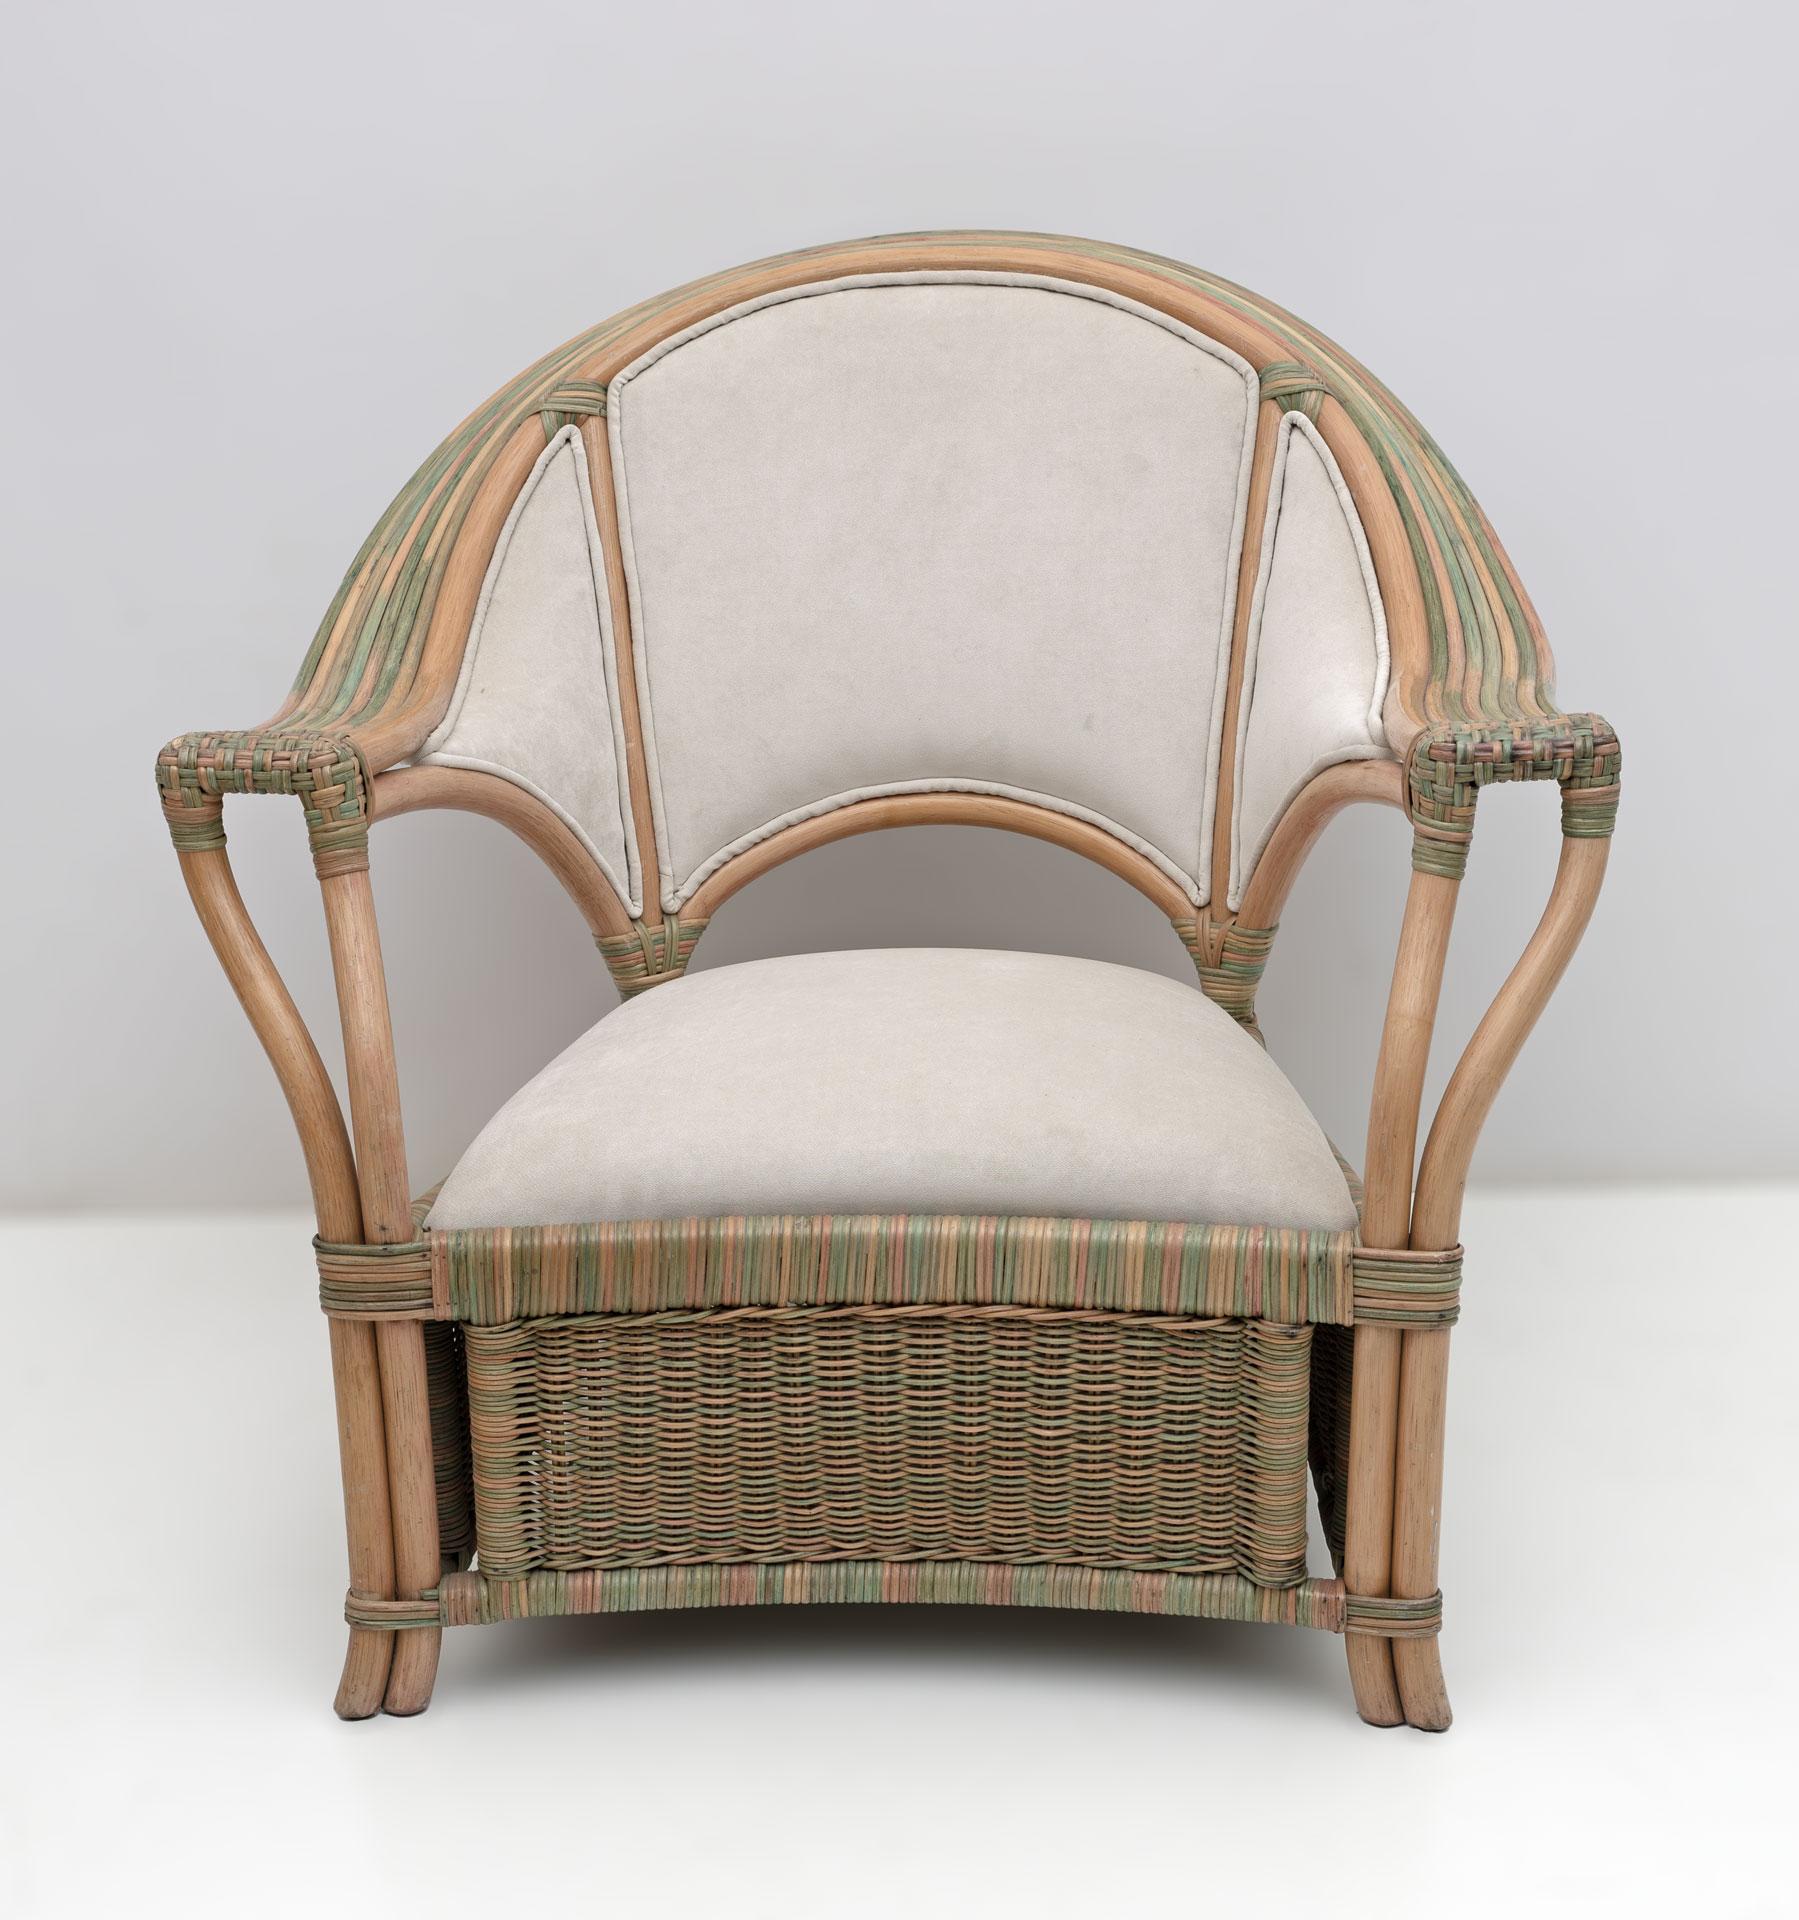 Pair of Mid-century Modern Italian Rattan and Wicker Armchairs, 1970s For Sale 2